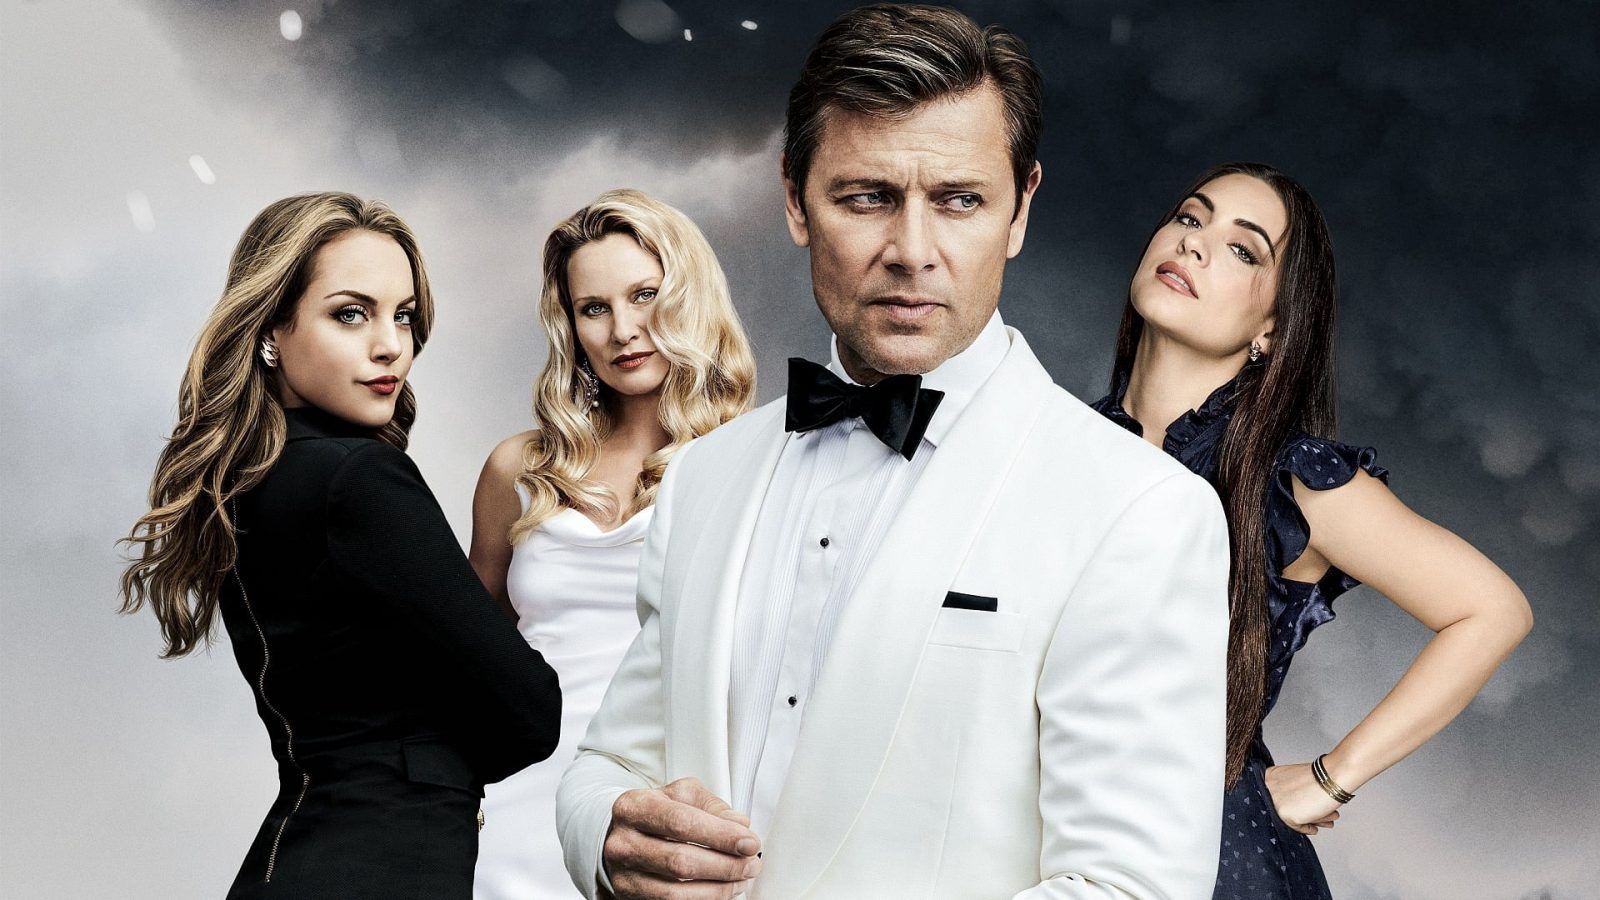 Dynasty Season 3 Renewed or Cancelled? and What's the Arrival Date